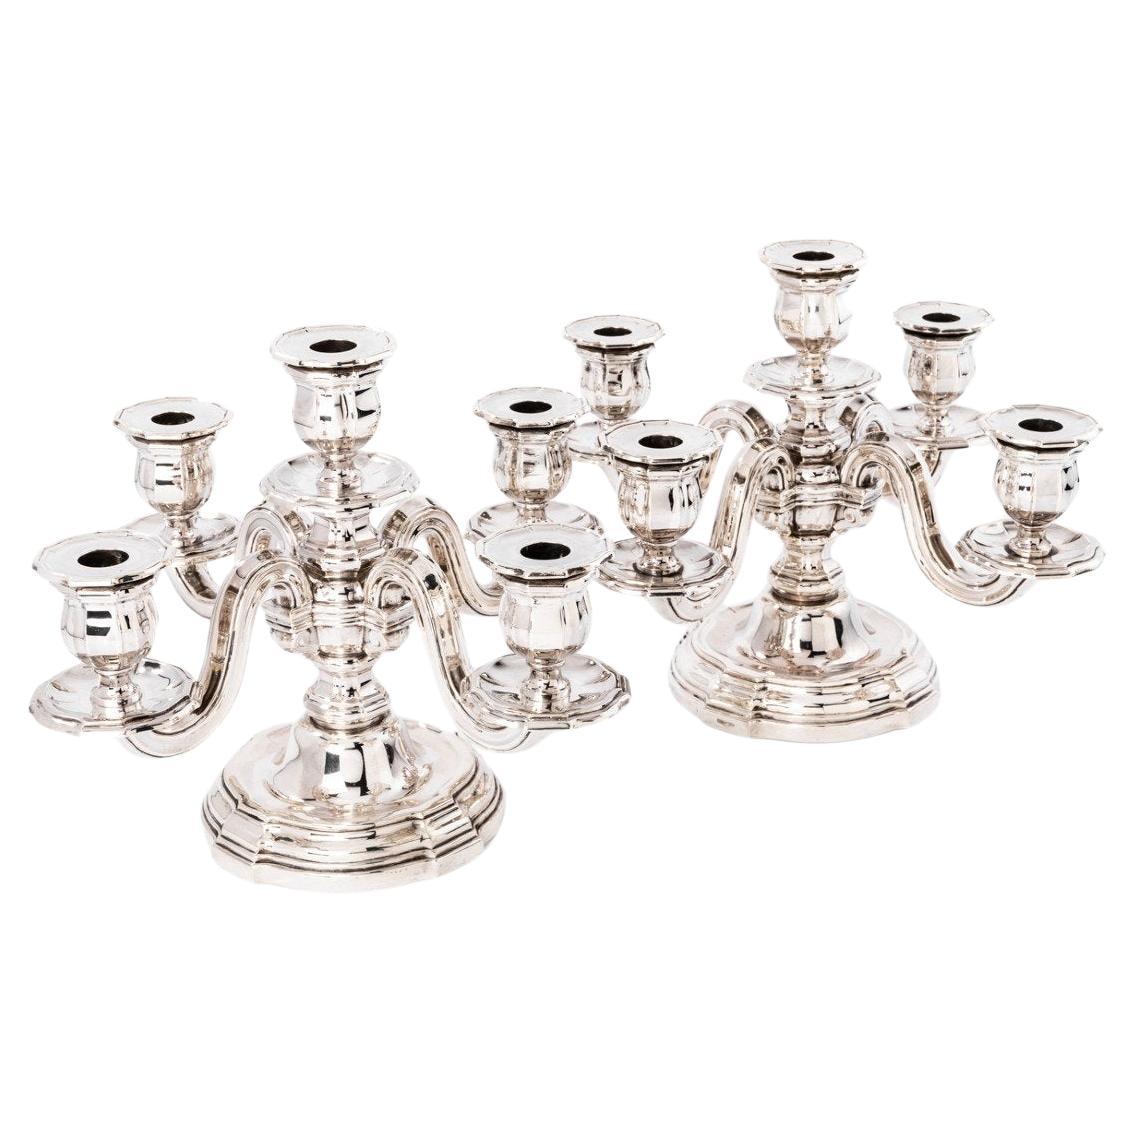 Pair of low candelabra in solid silver, ART DECO period, with four light arms plus a central. plain decor with tiered fillets.

Dimensions: height 25 cm - width 35 cm

Material: 1st grade silver

Weight: 3940 grams

Hallmark: MINERVE

Period: ART